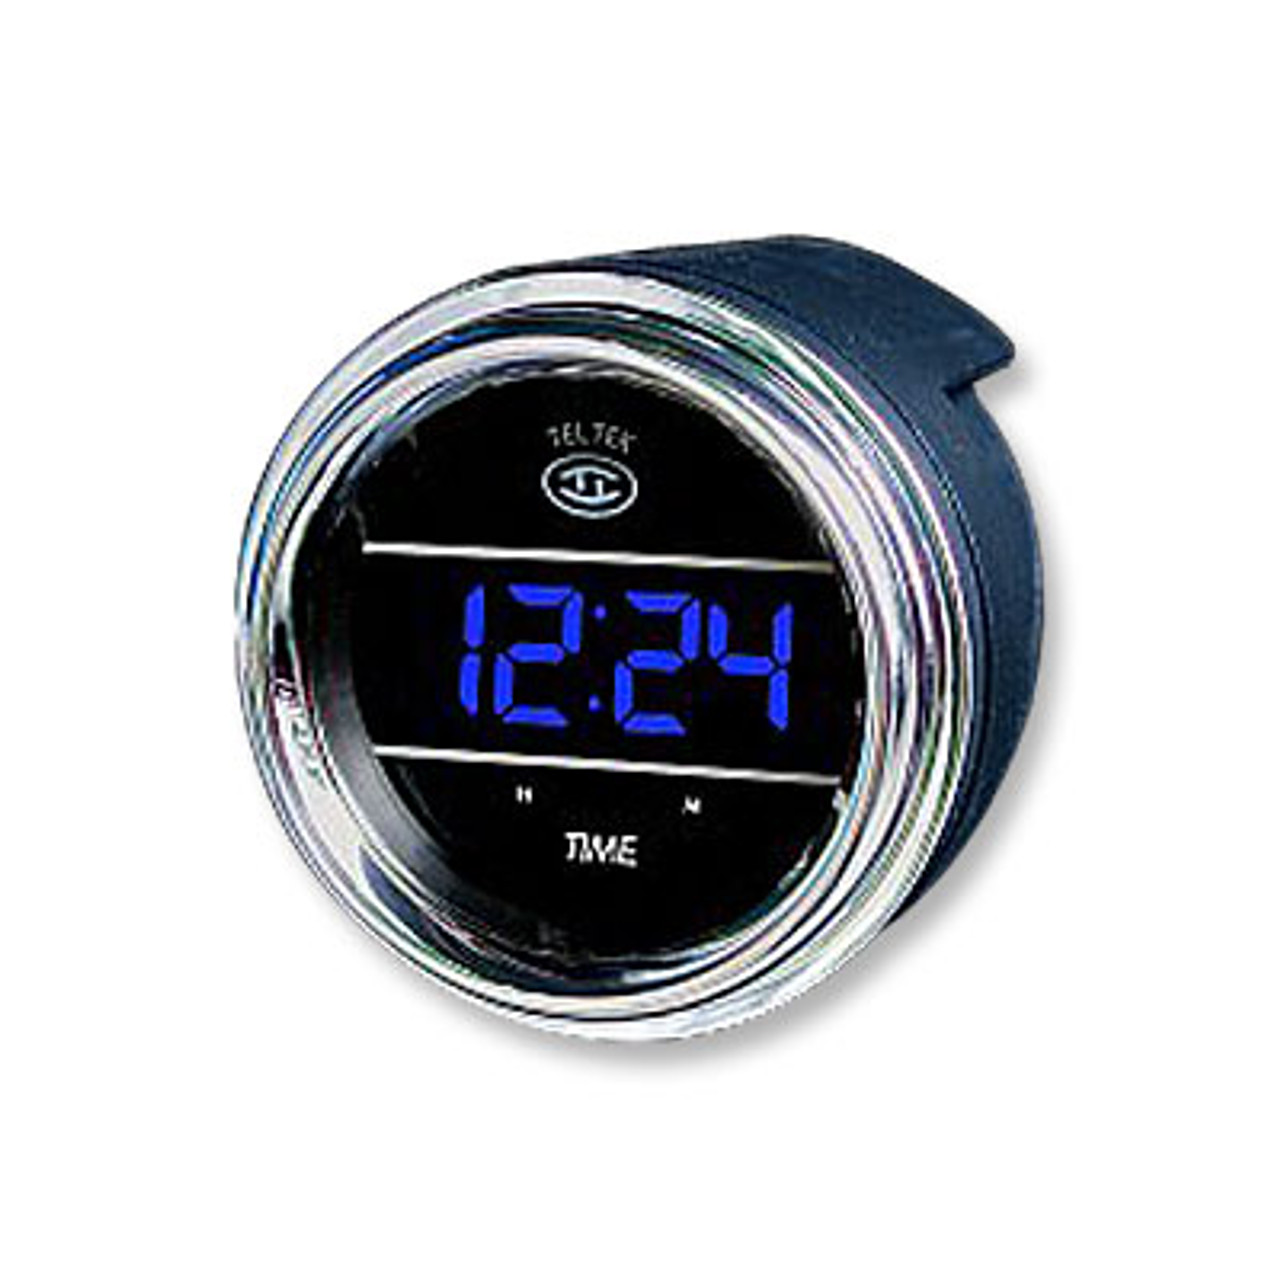 Teltek Outside Temperature Gauge with Ice Warning and Blue Display - 202